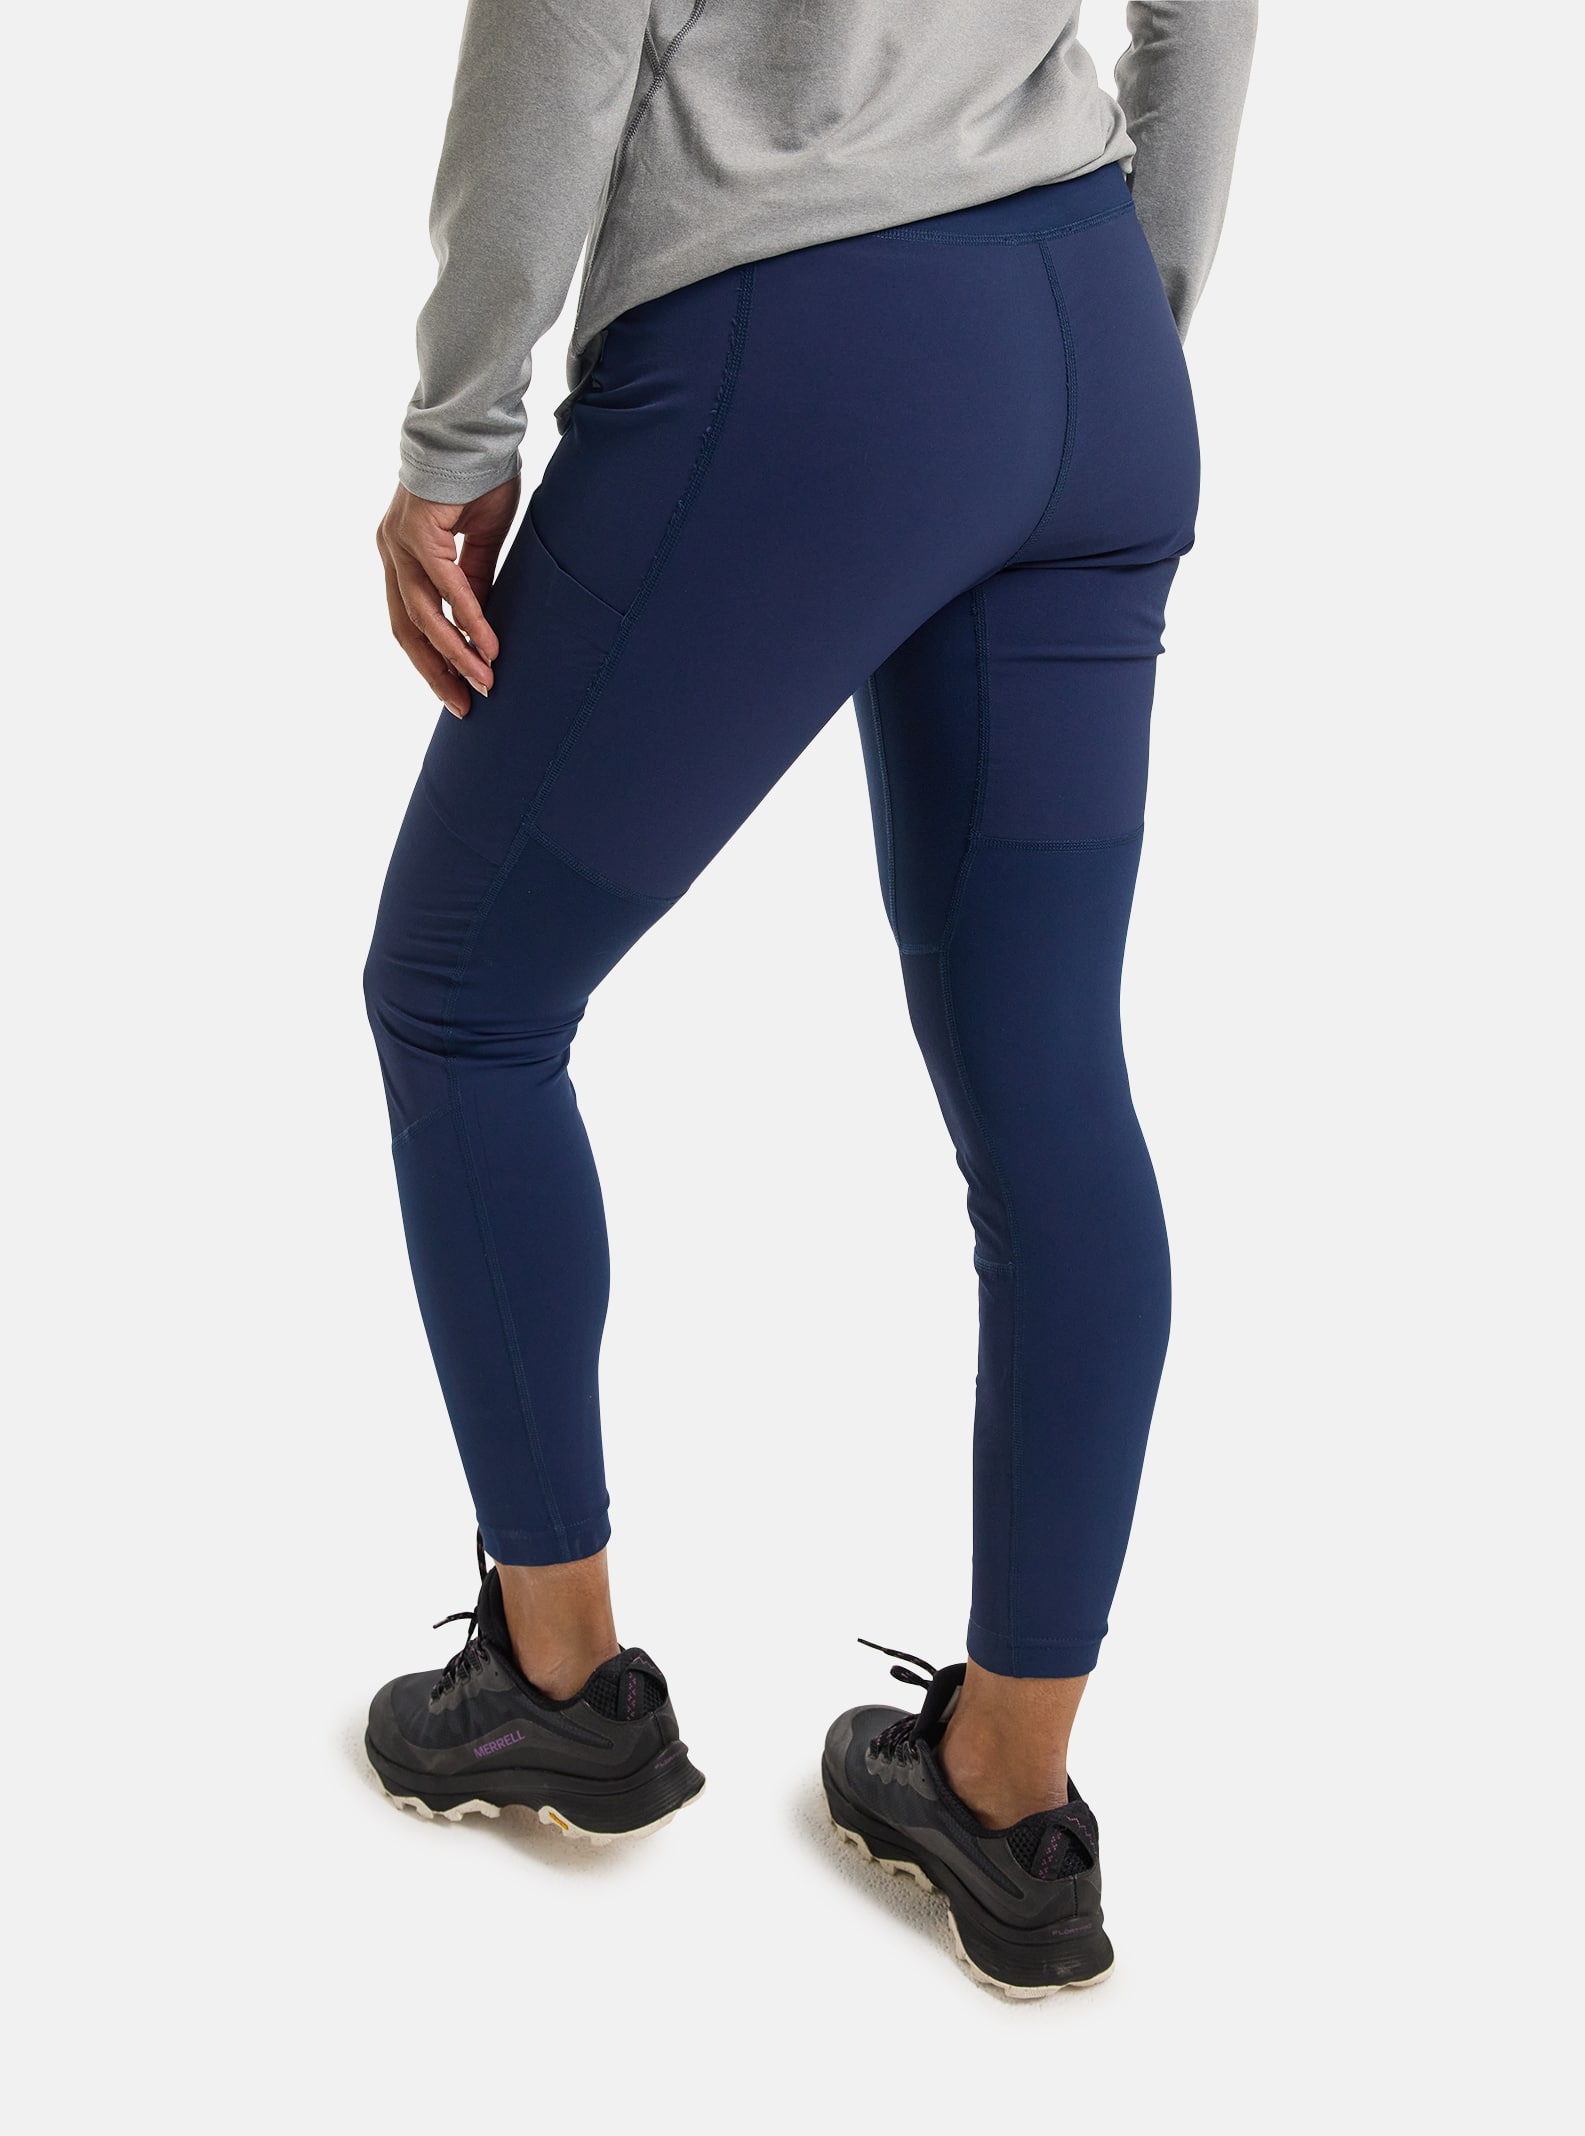 Burton Women's Luxemore Legging - 701 Cycle and Sport